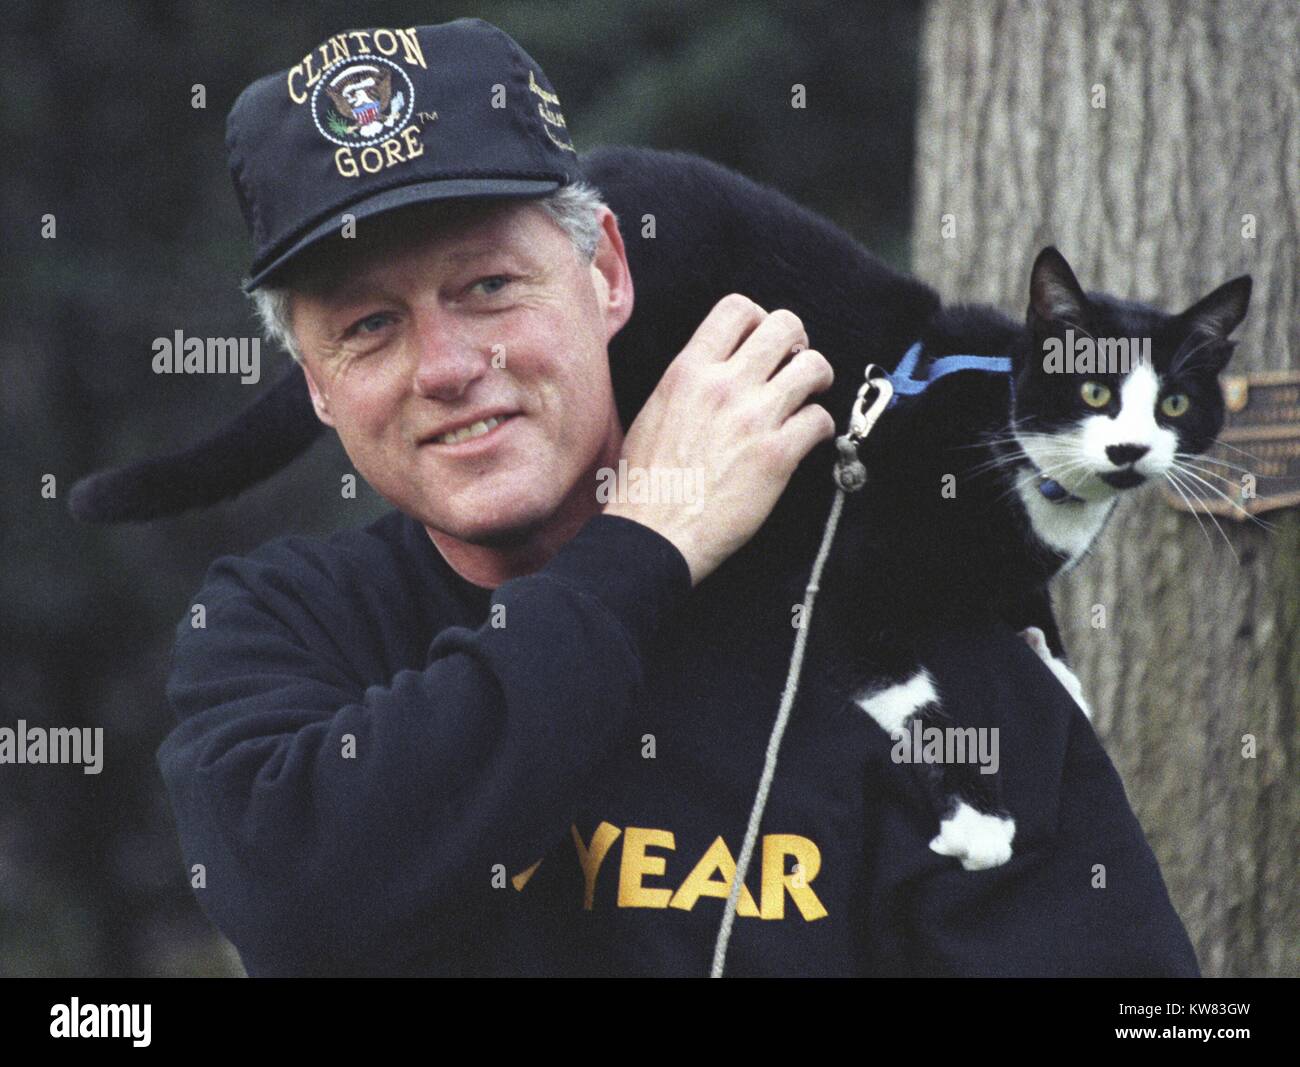 President Bill Clinton, wearing pullover sweatshirt and a Clinton-Gore administration baseball hat, smiles while taking a walk on the White House grounds with the First Pet, Socks the Cat, with black fur, white face, and blue collar, perched on his shoulders, with a plaque mounted to a tree behind them, Washington, District of Columbia, December 20, 1993. Stock Photo